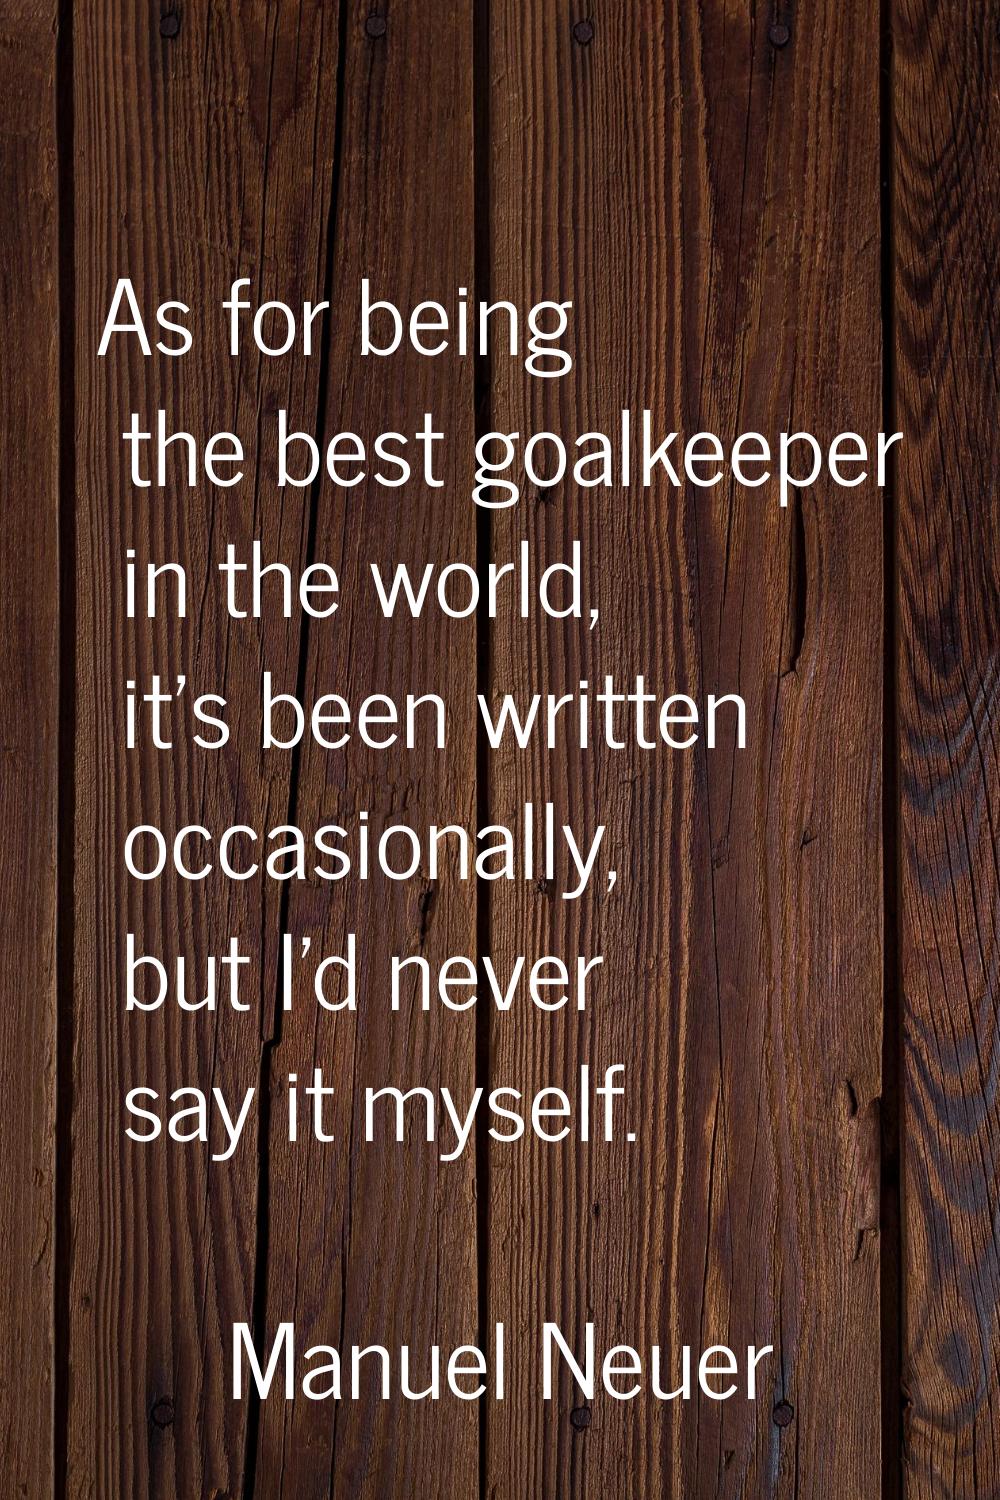 As for being the best goalkeeper in the world, it's been written occasionally, but I'd never say it